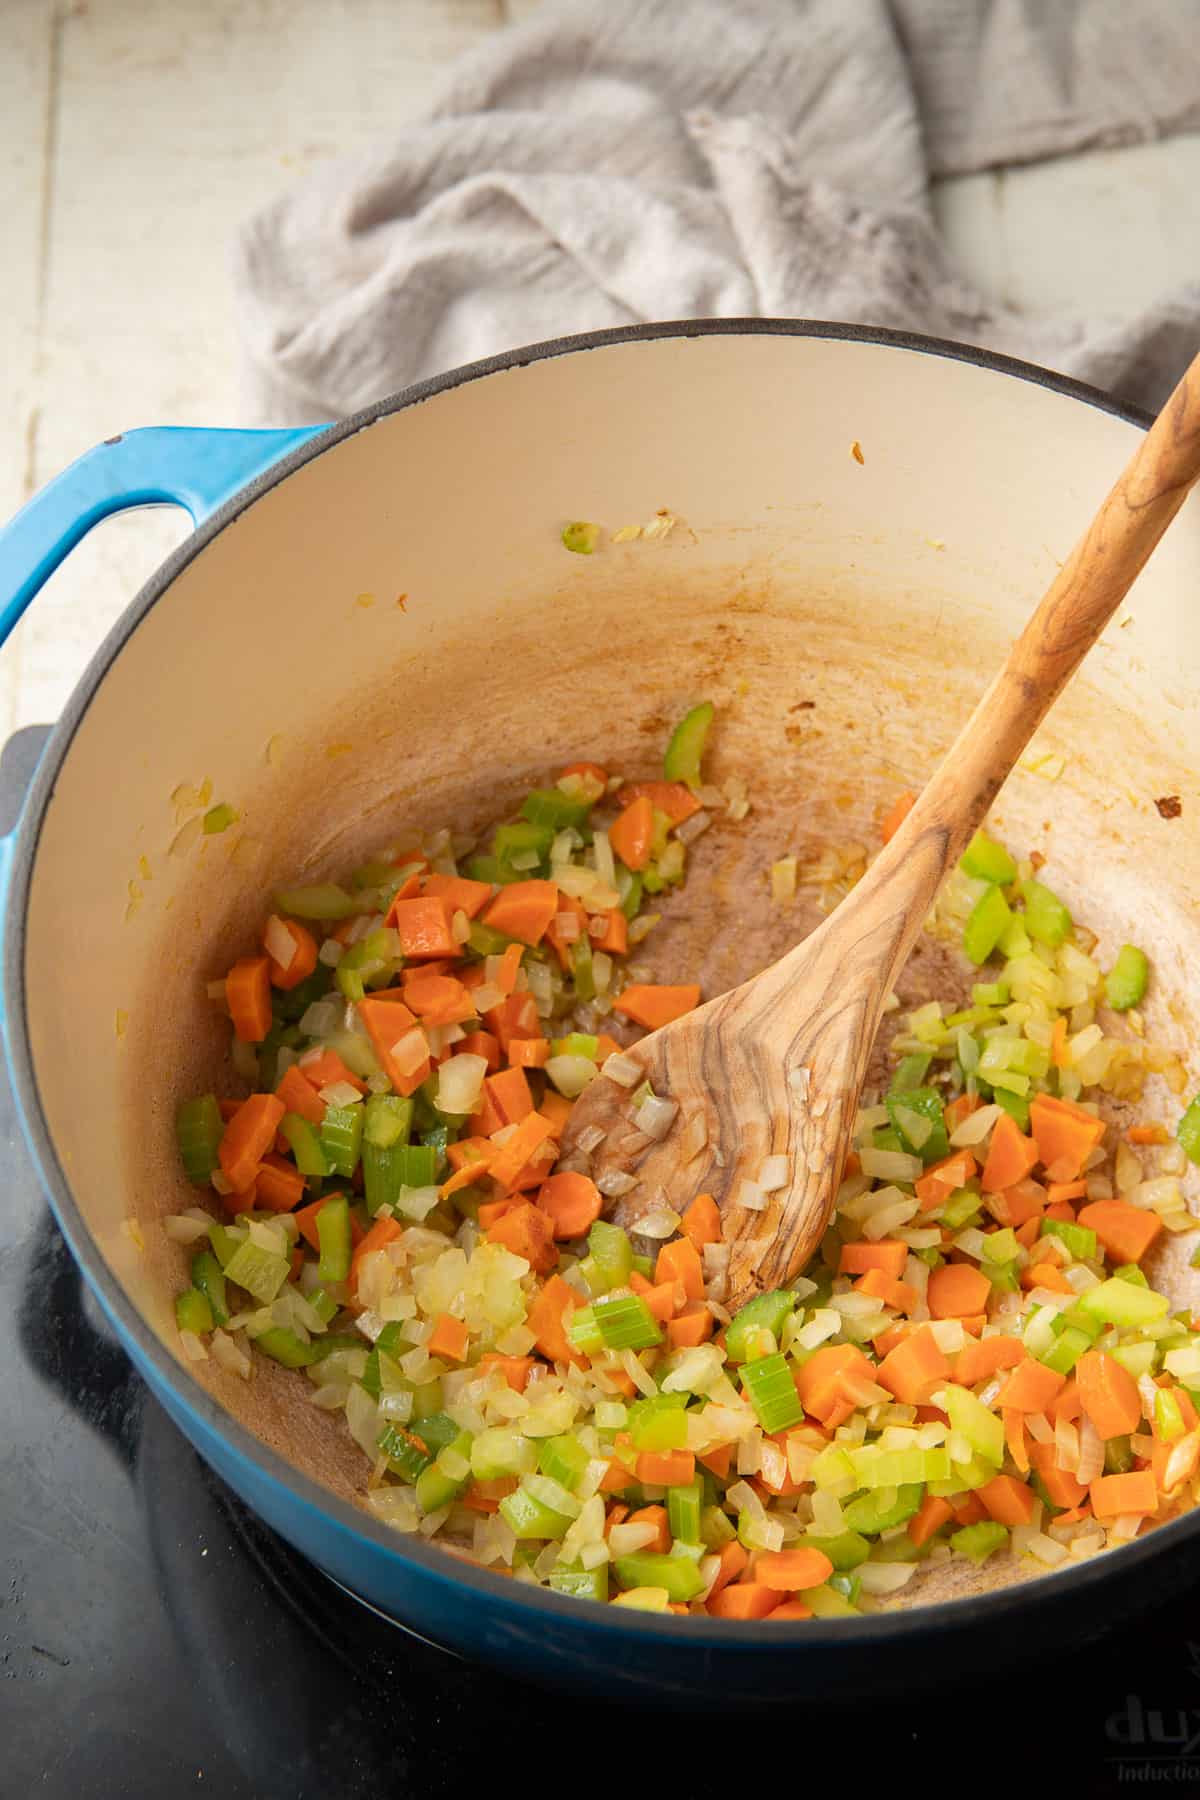 Carrots, celery, garlic, and onion cooking in a pot with wooden spoon.